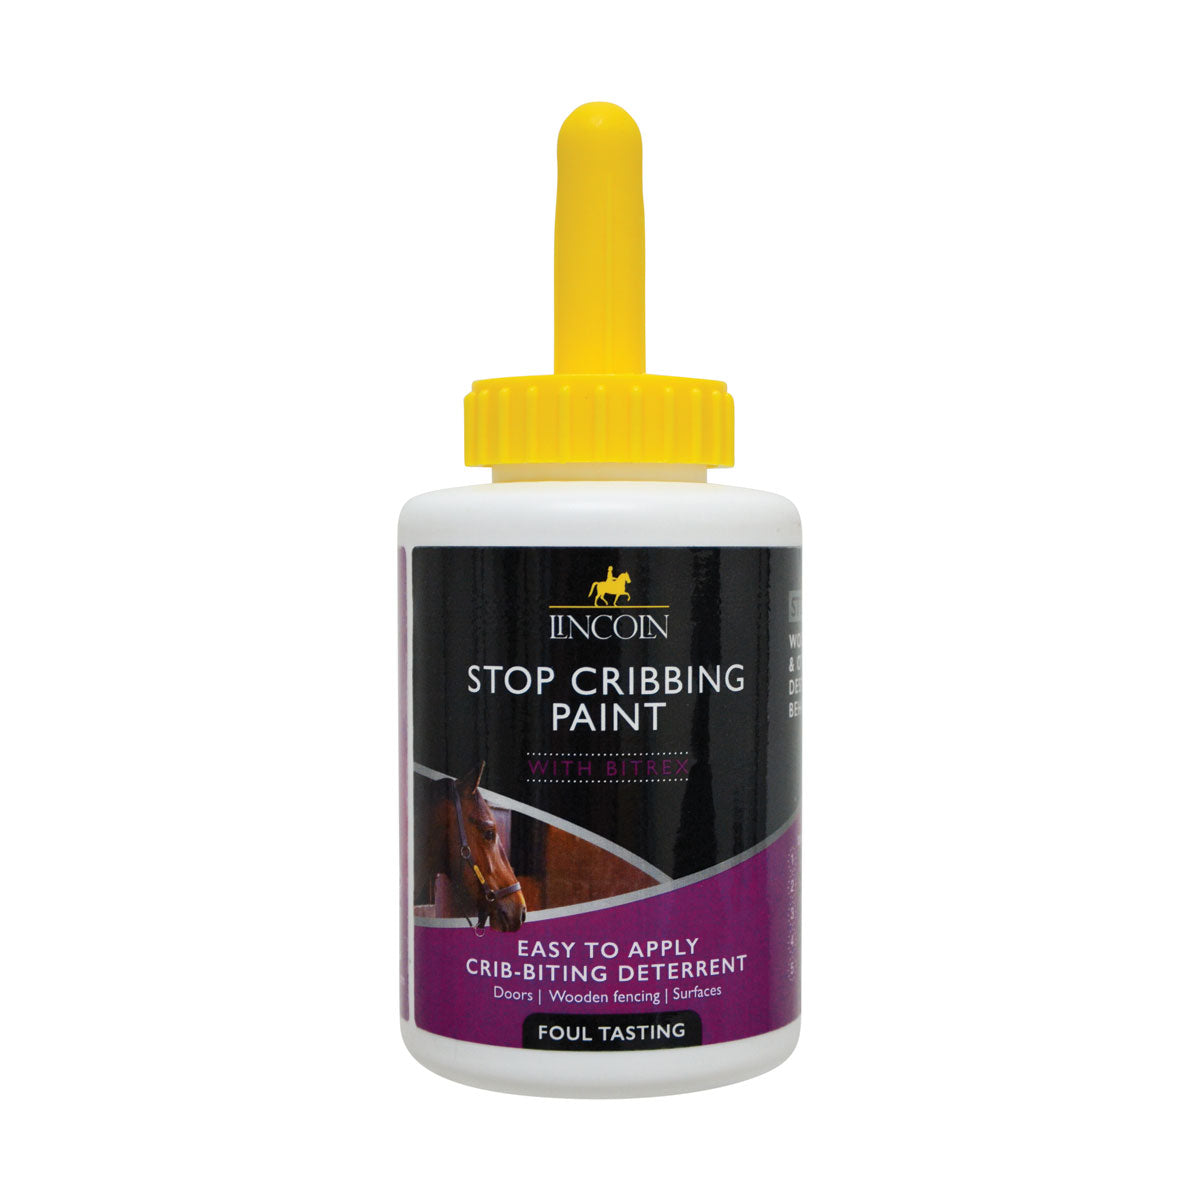 Lincoln Stop Cribbing Paint: Deter Crib Biting and Maintain Peace in Your Stables